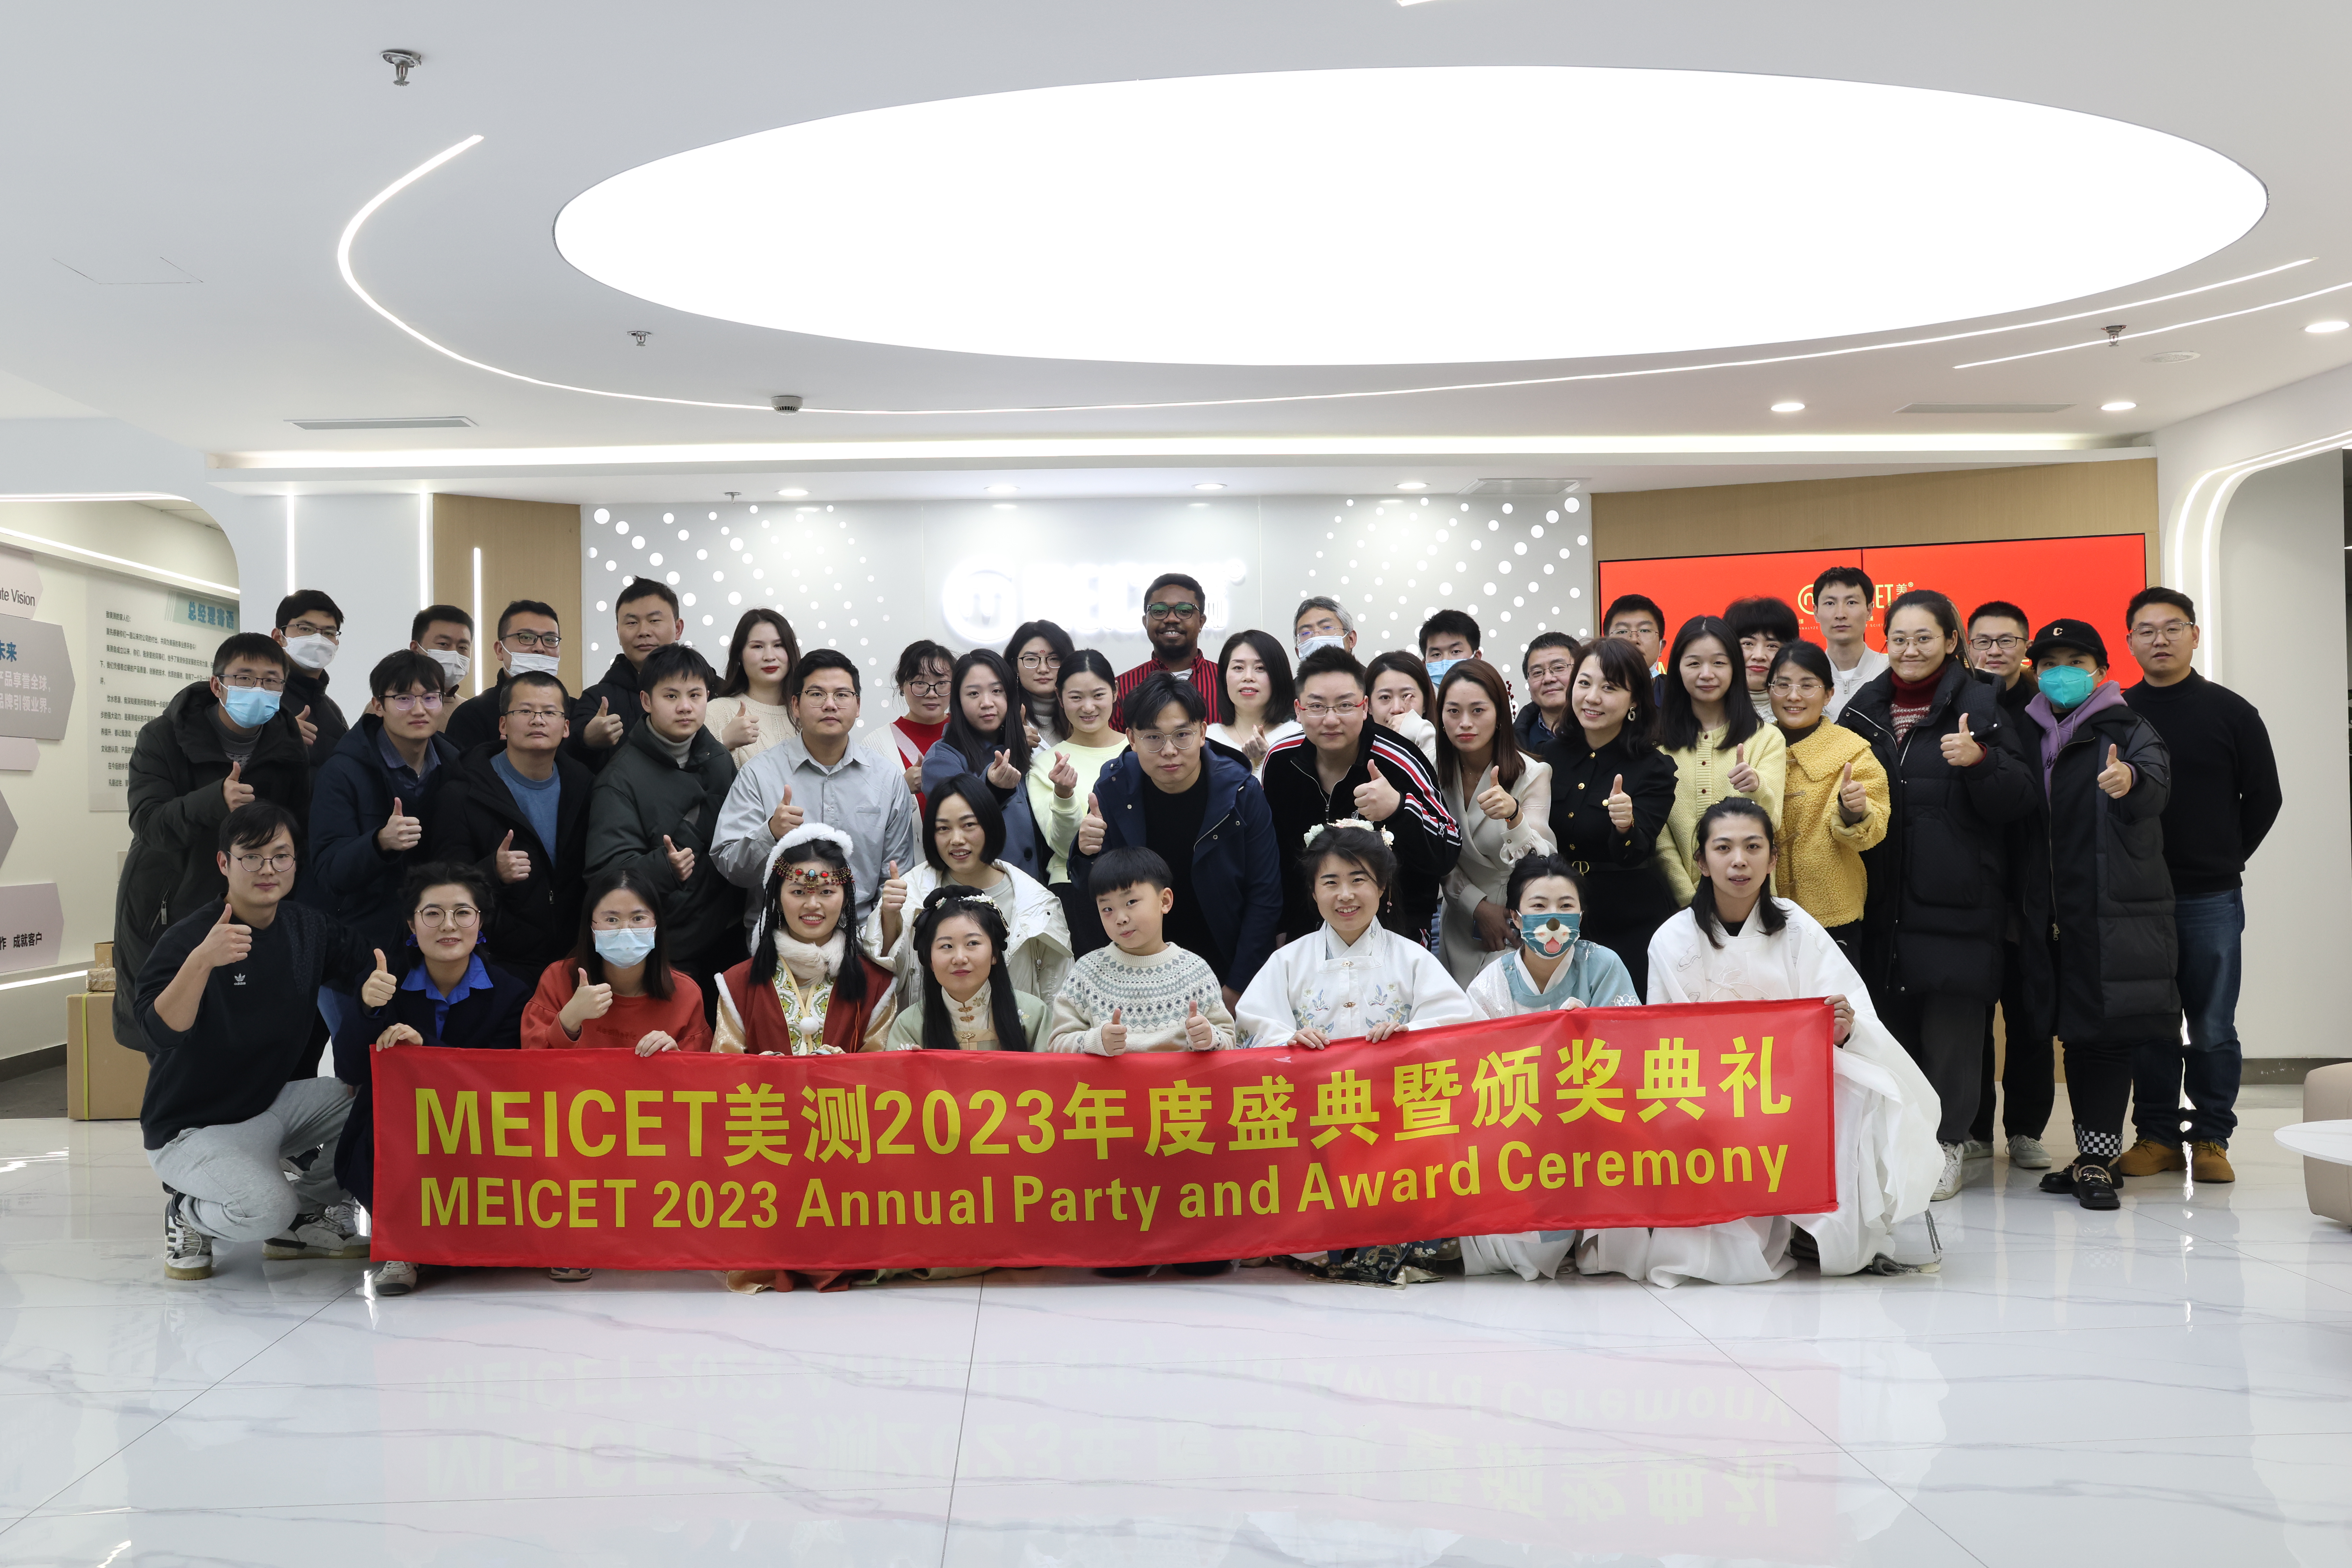 MEICET 2023 Annual Party and Award Ceremony